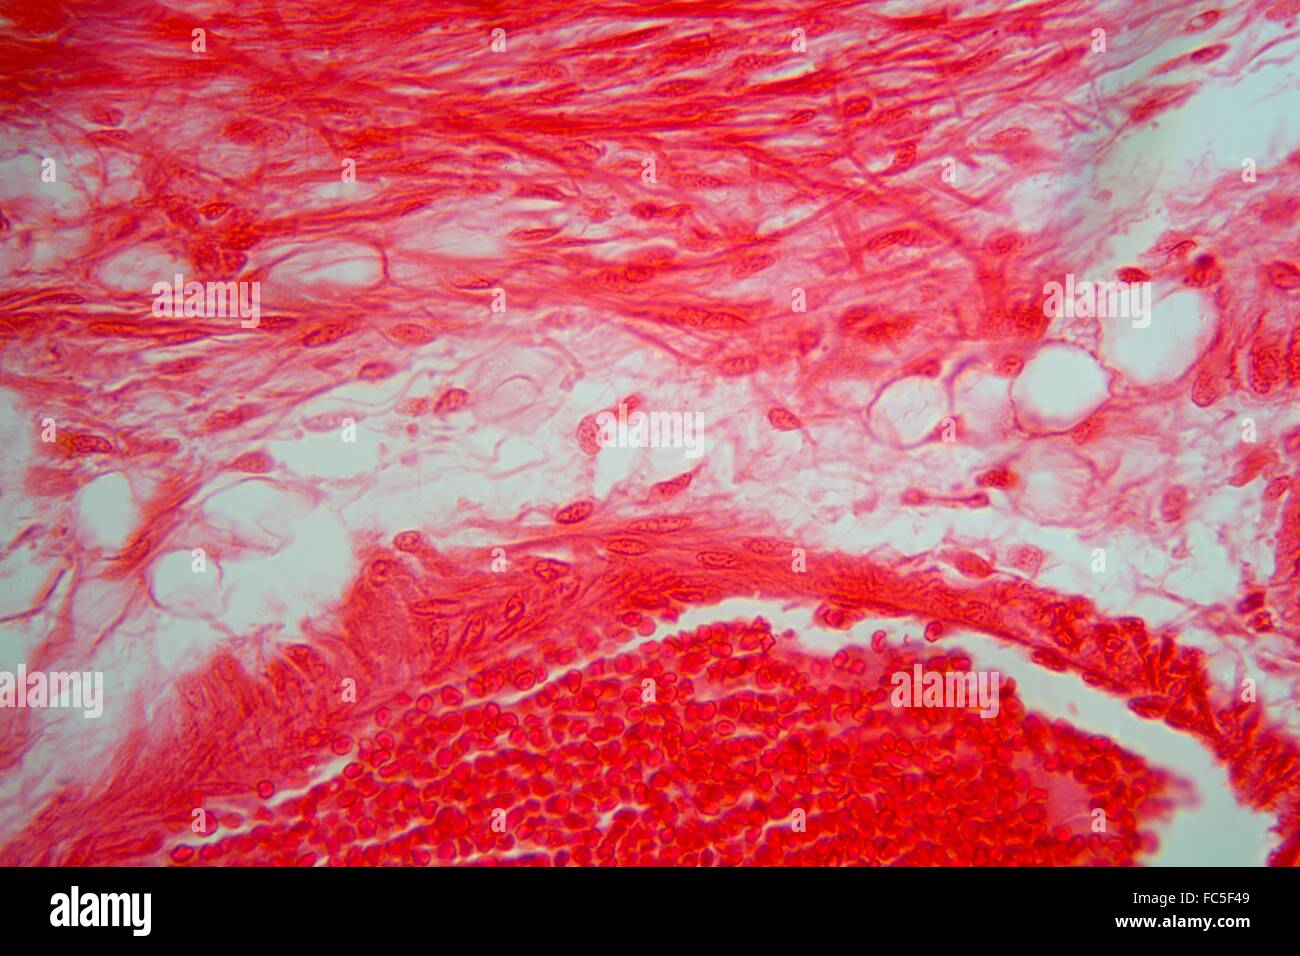 Cells of trachea tissue under the microscope Stock Photo